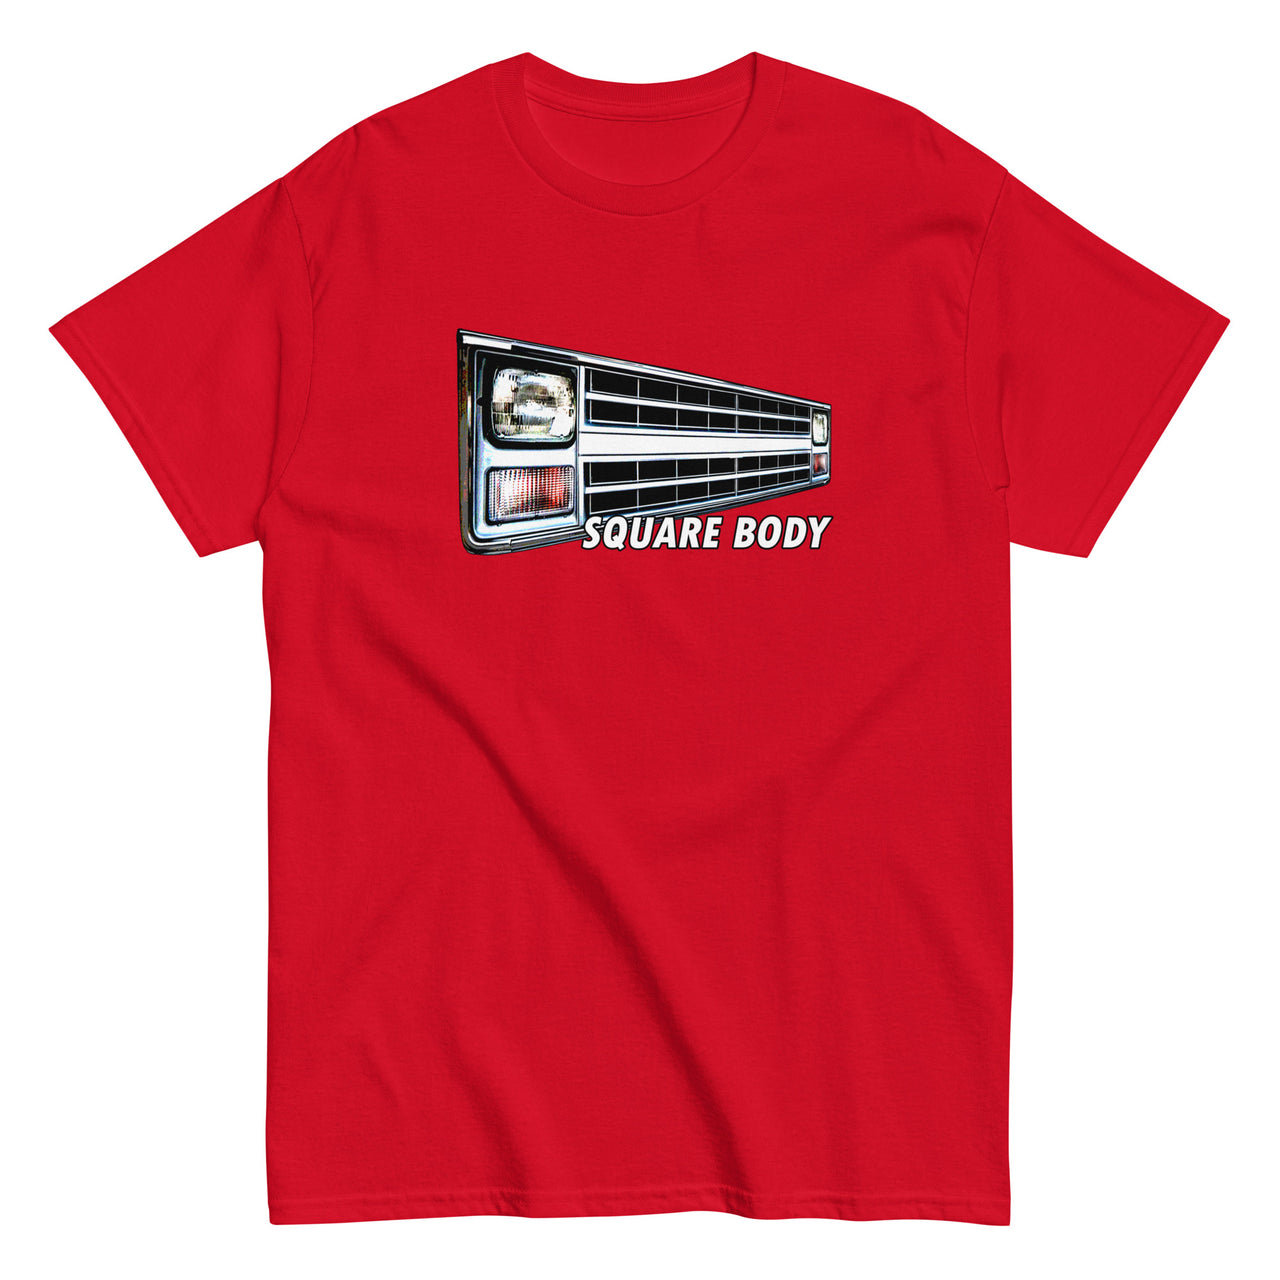 Square Body Angled 80s Truck Grille T-Shirt in red